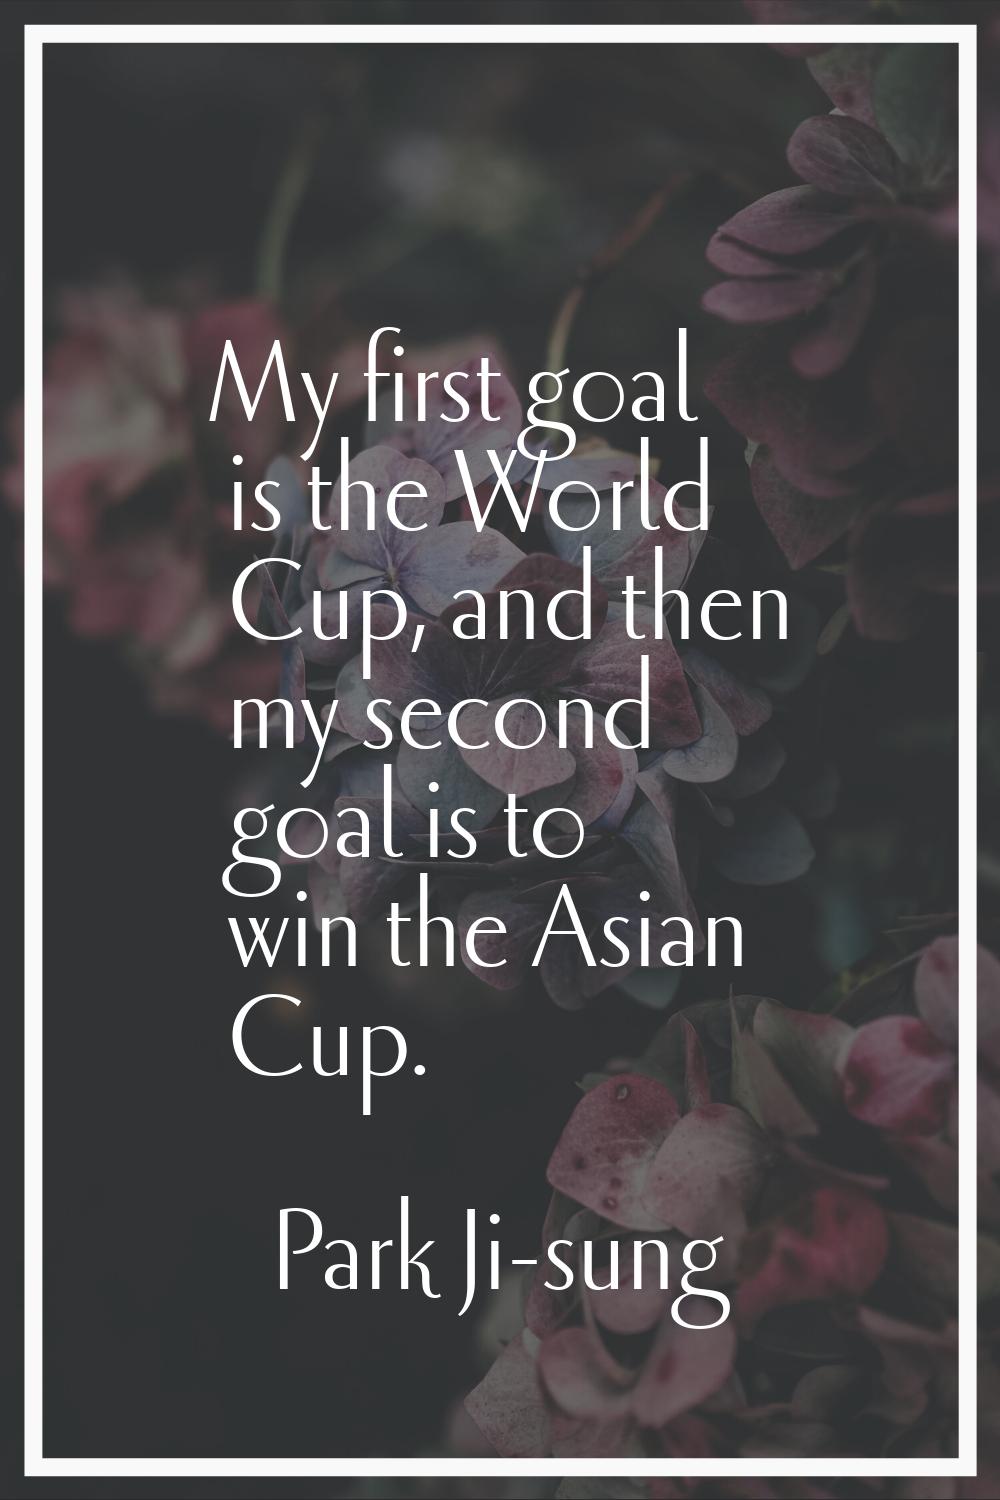 My first goal is the World Cup, and then my second goal is to win the Asian Cup.